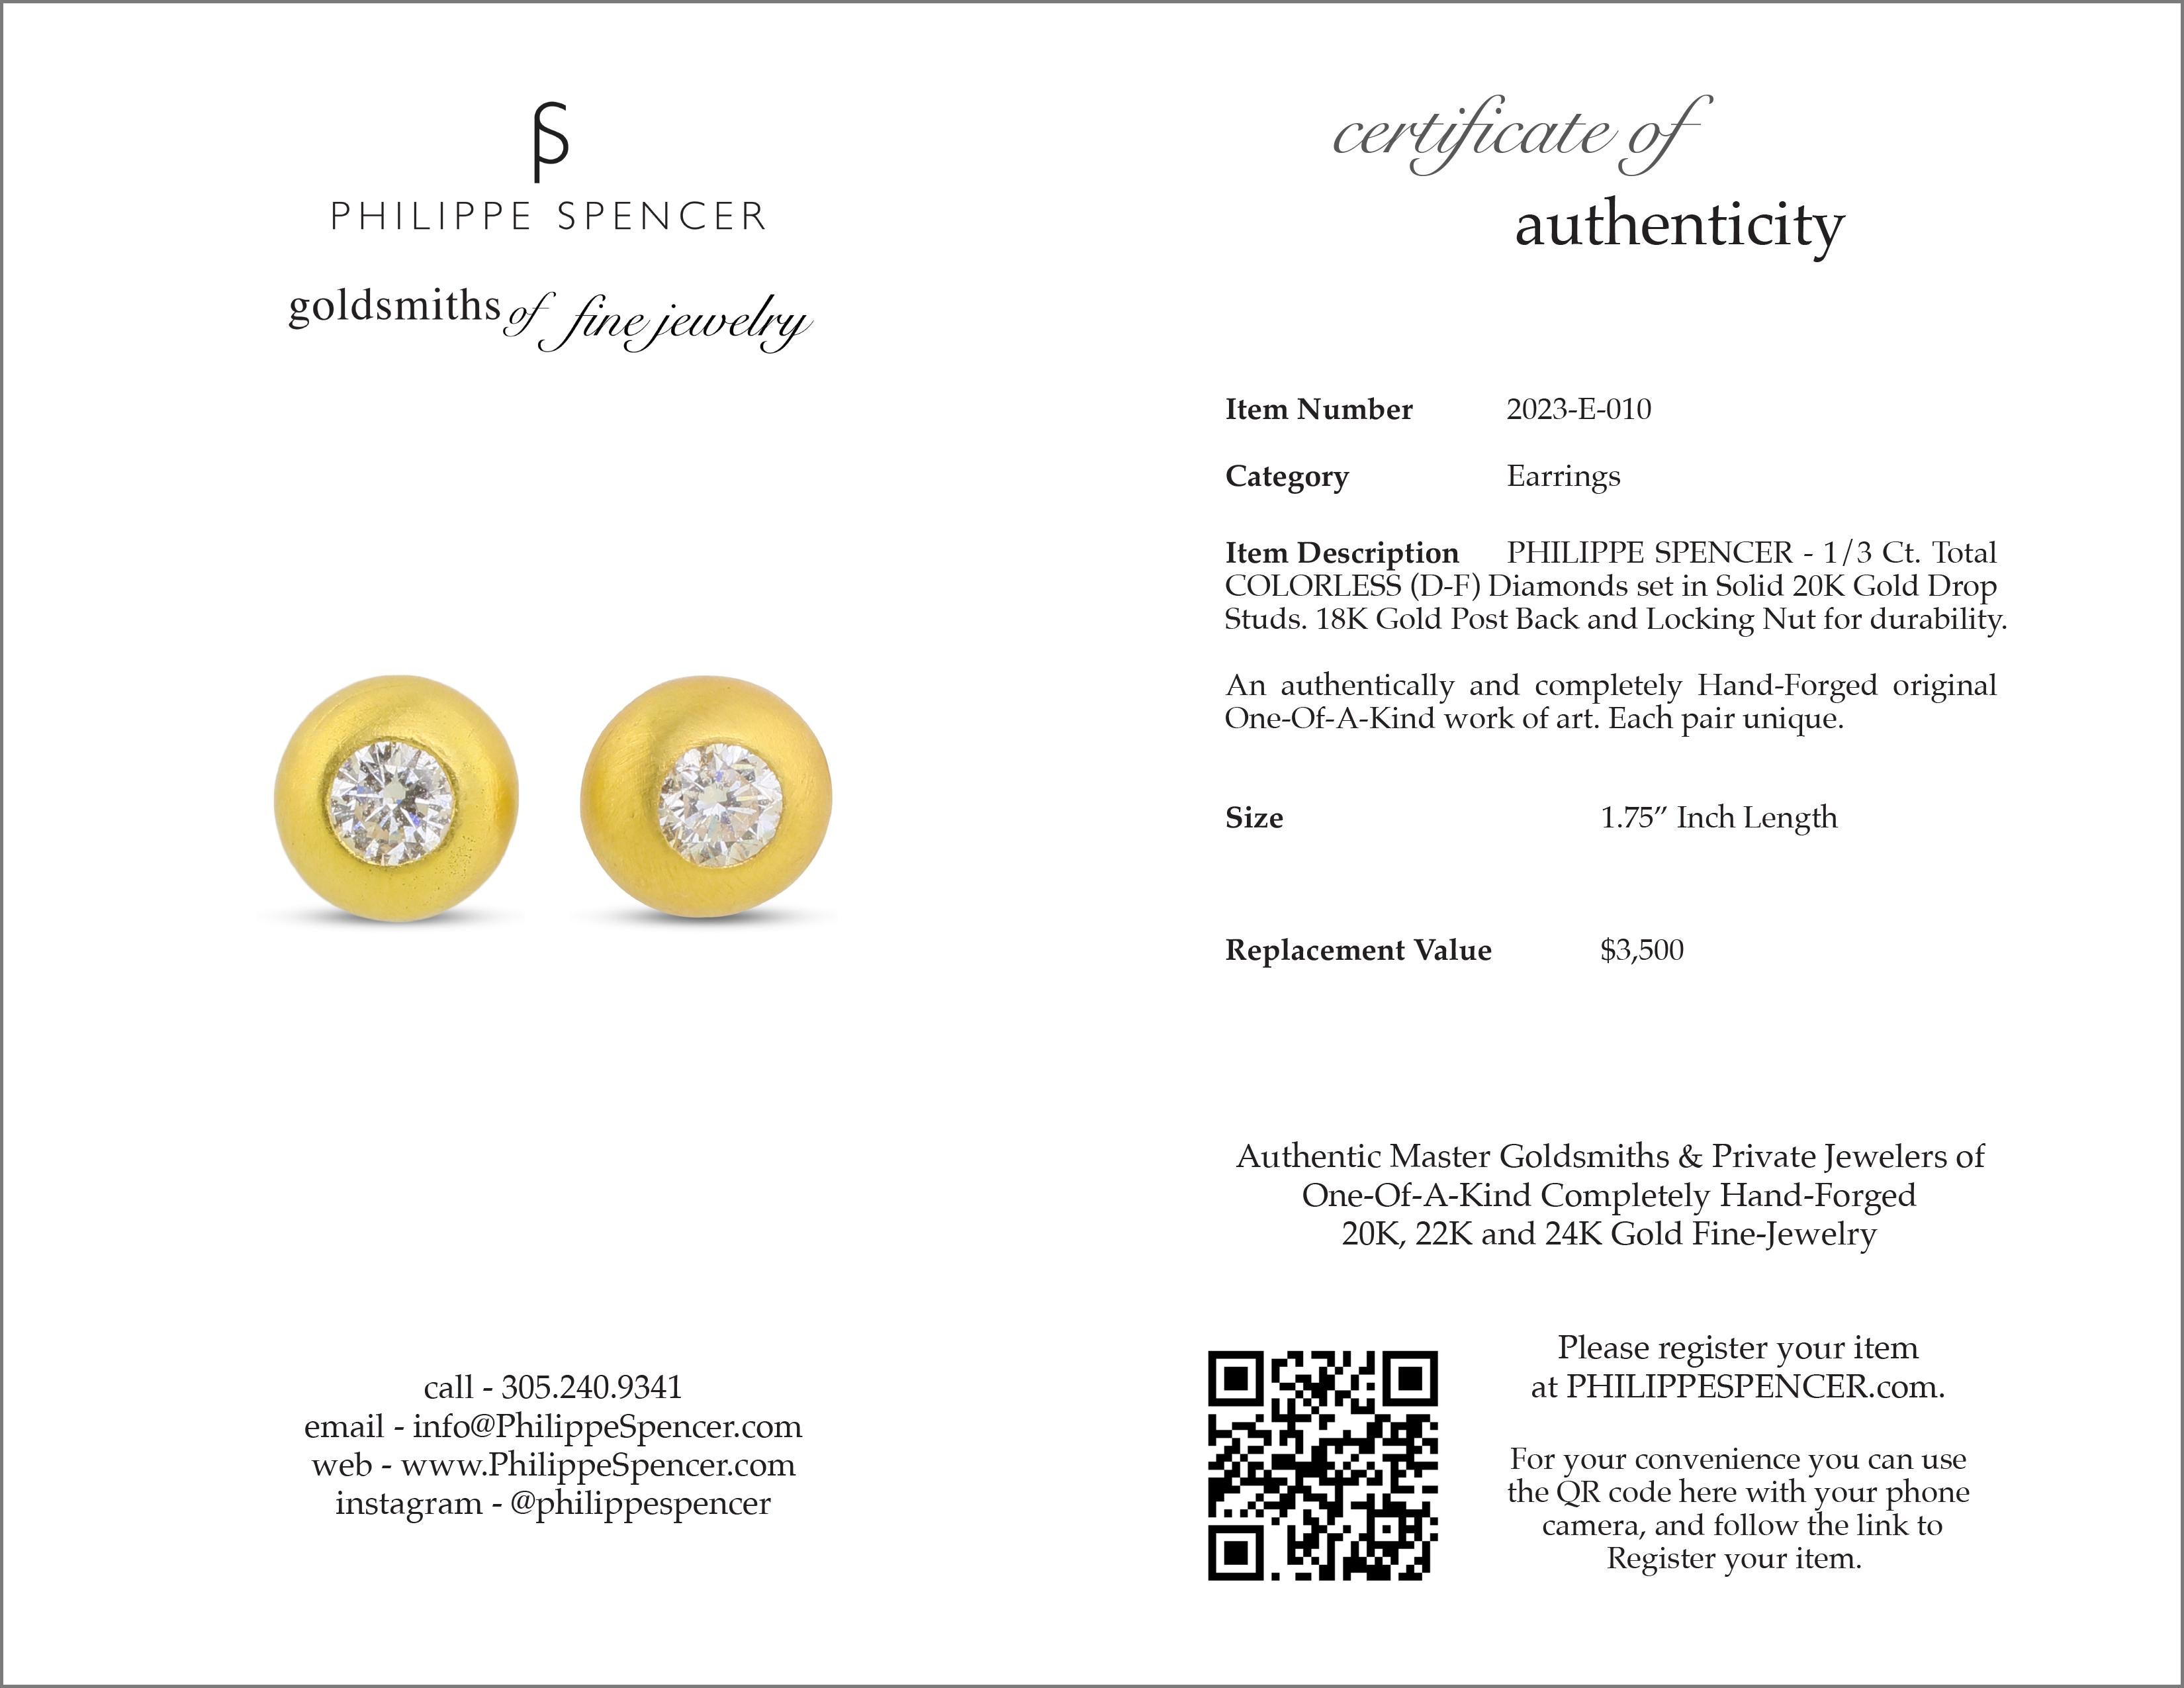 Artisan PHILIPPE SPENCER 1/3 Ct. Tw. COLORLESS Diamond 20K Gold Drop Stud Earrings For Sale